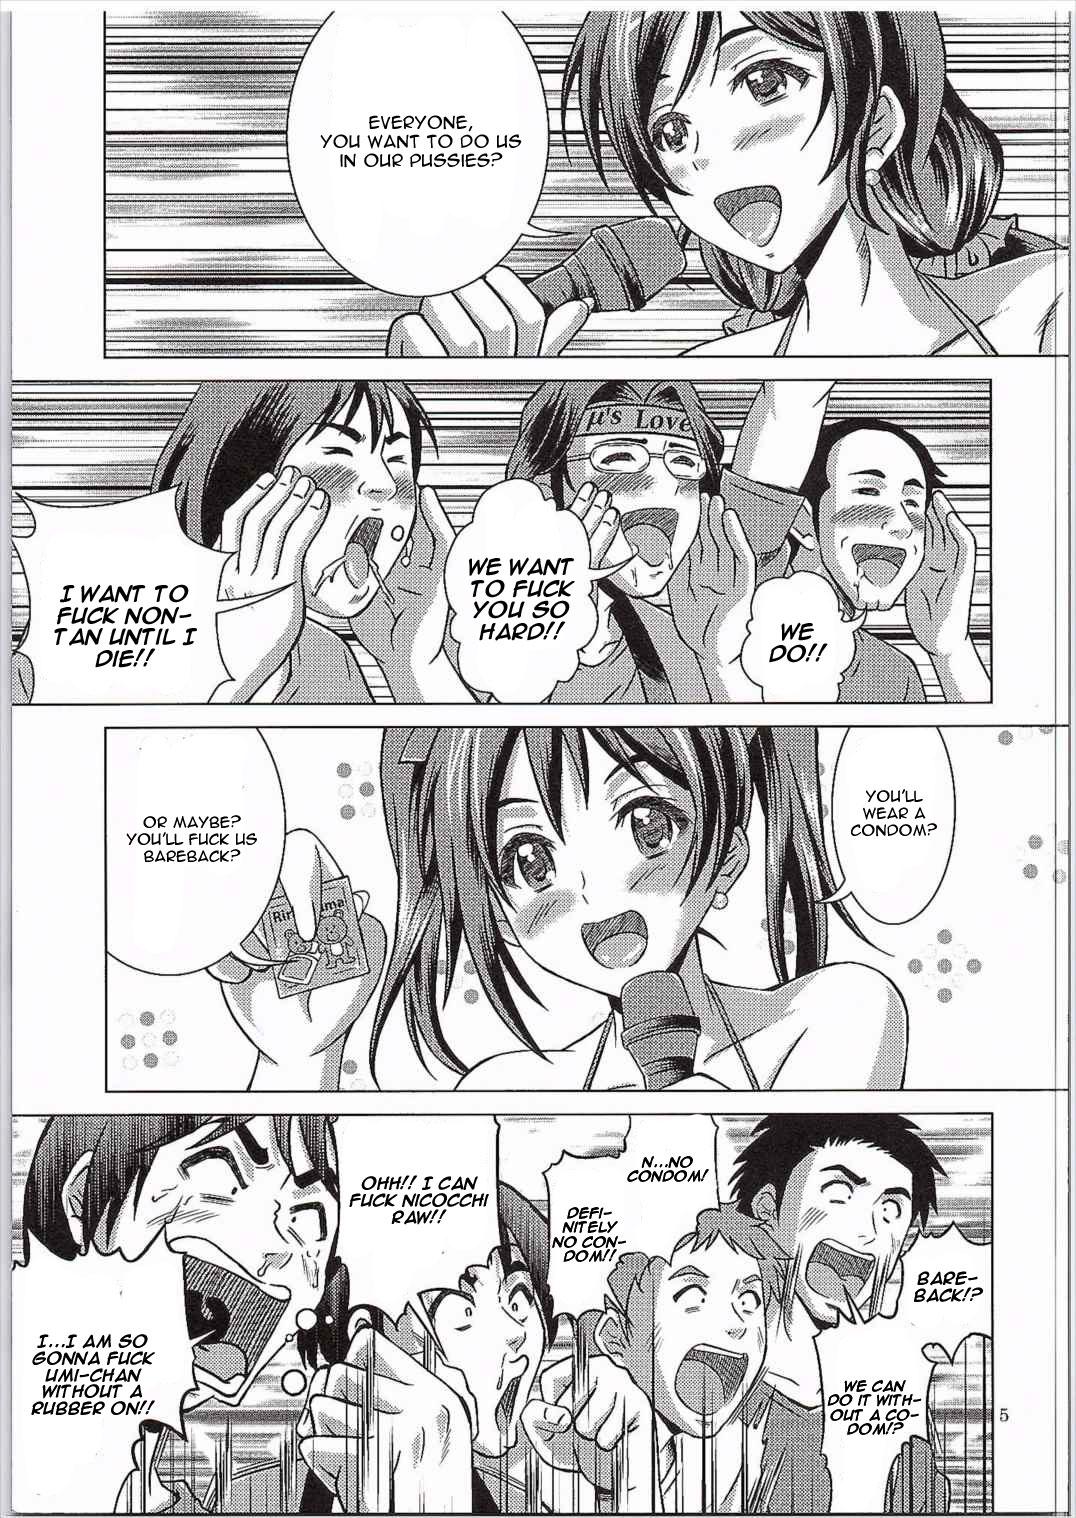 Indian Sex Bakobako Live! - Love live Gay Outinpublic - Page 4